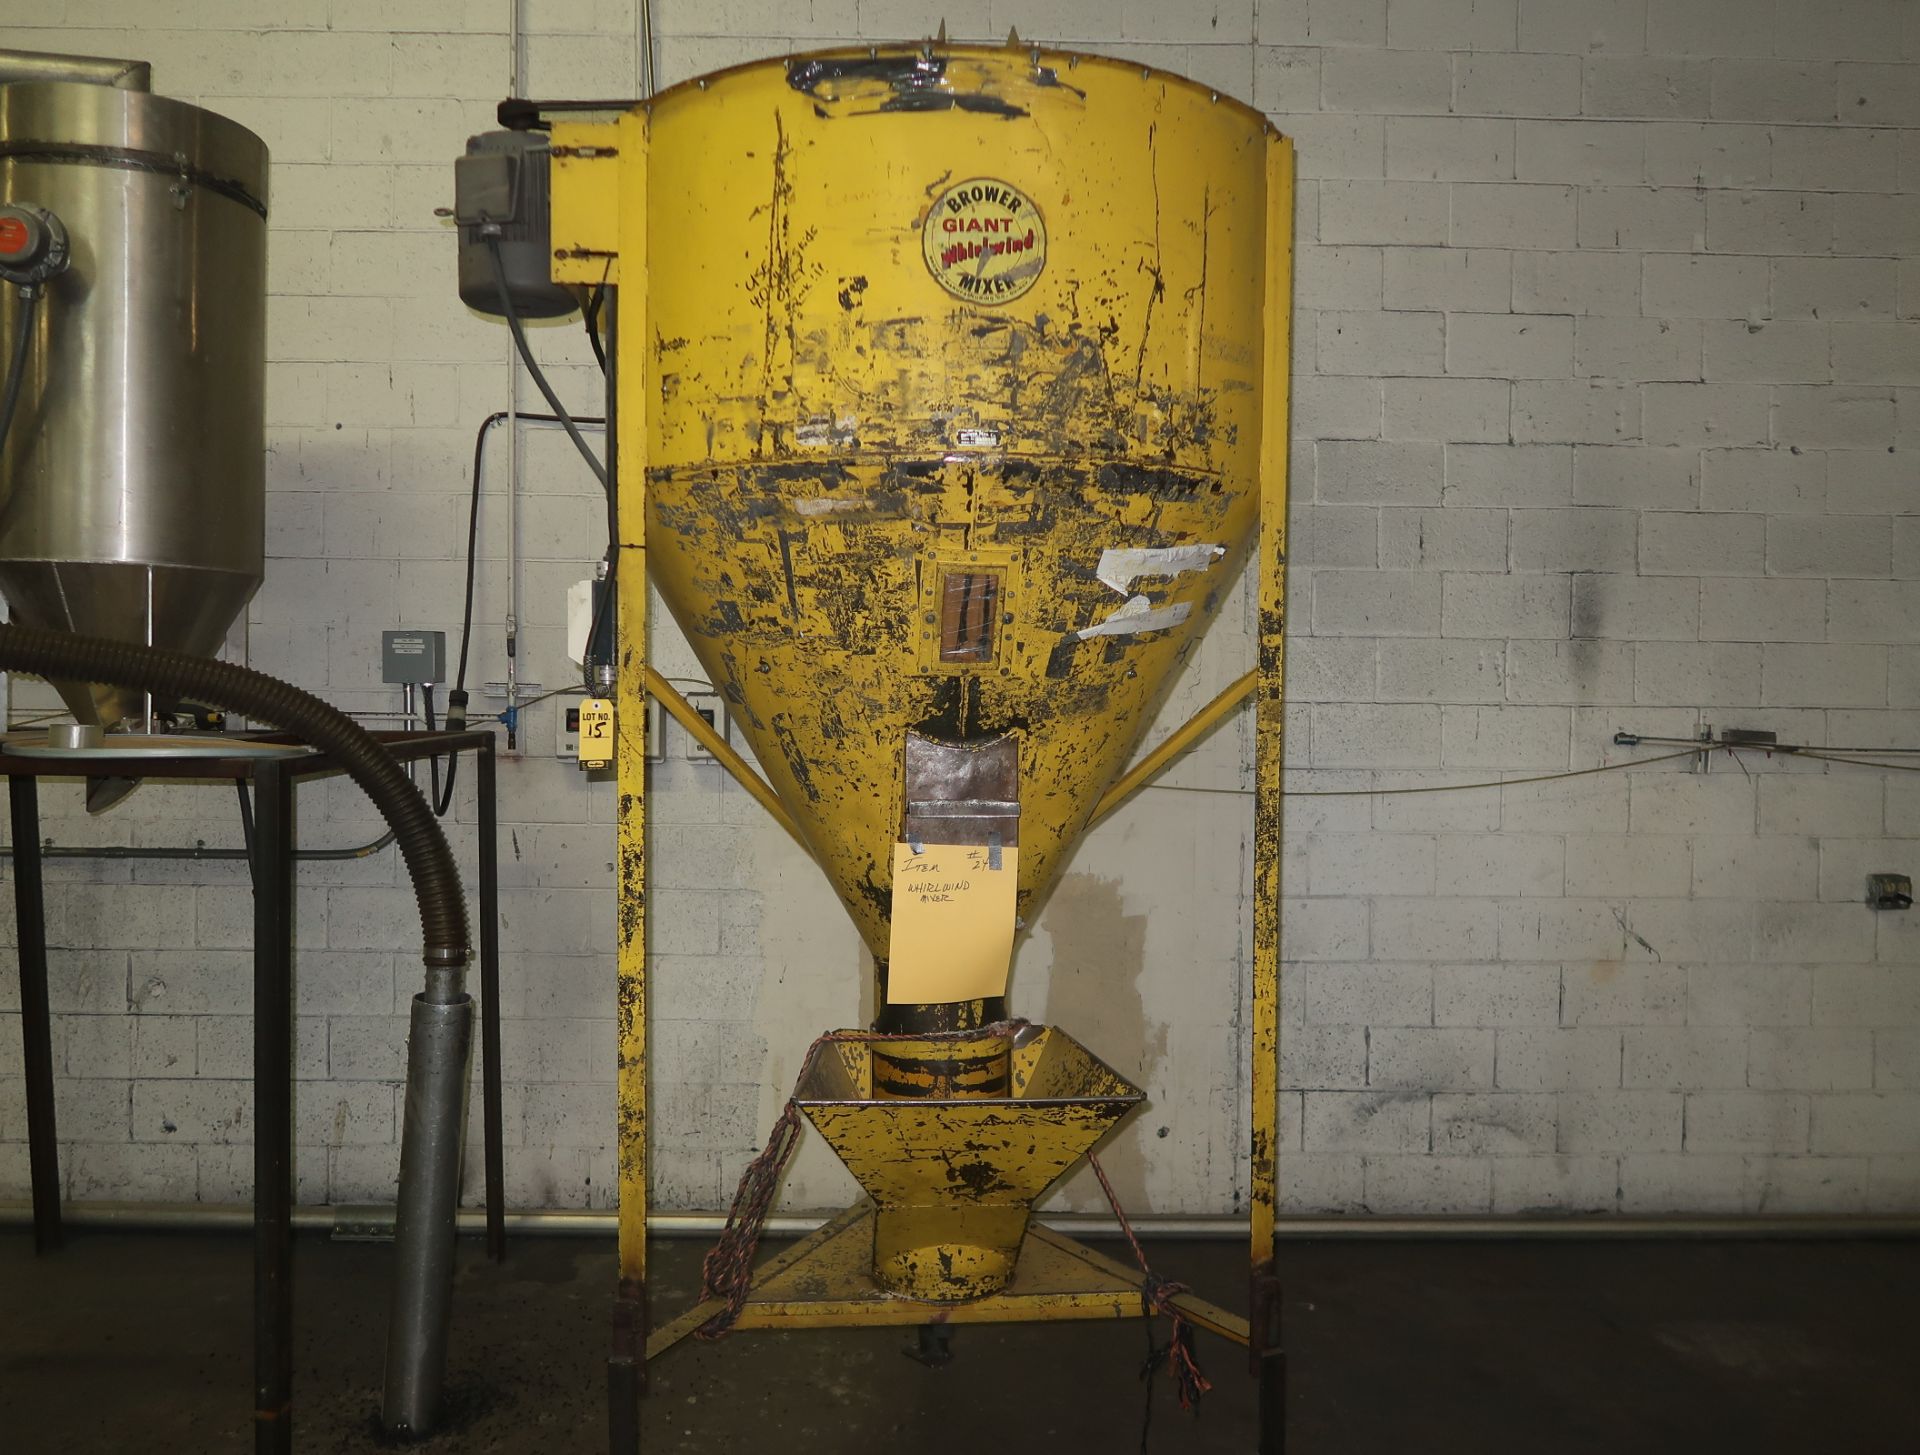 BROWNER WHIRLWIND MIXER 480 3PHASE